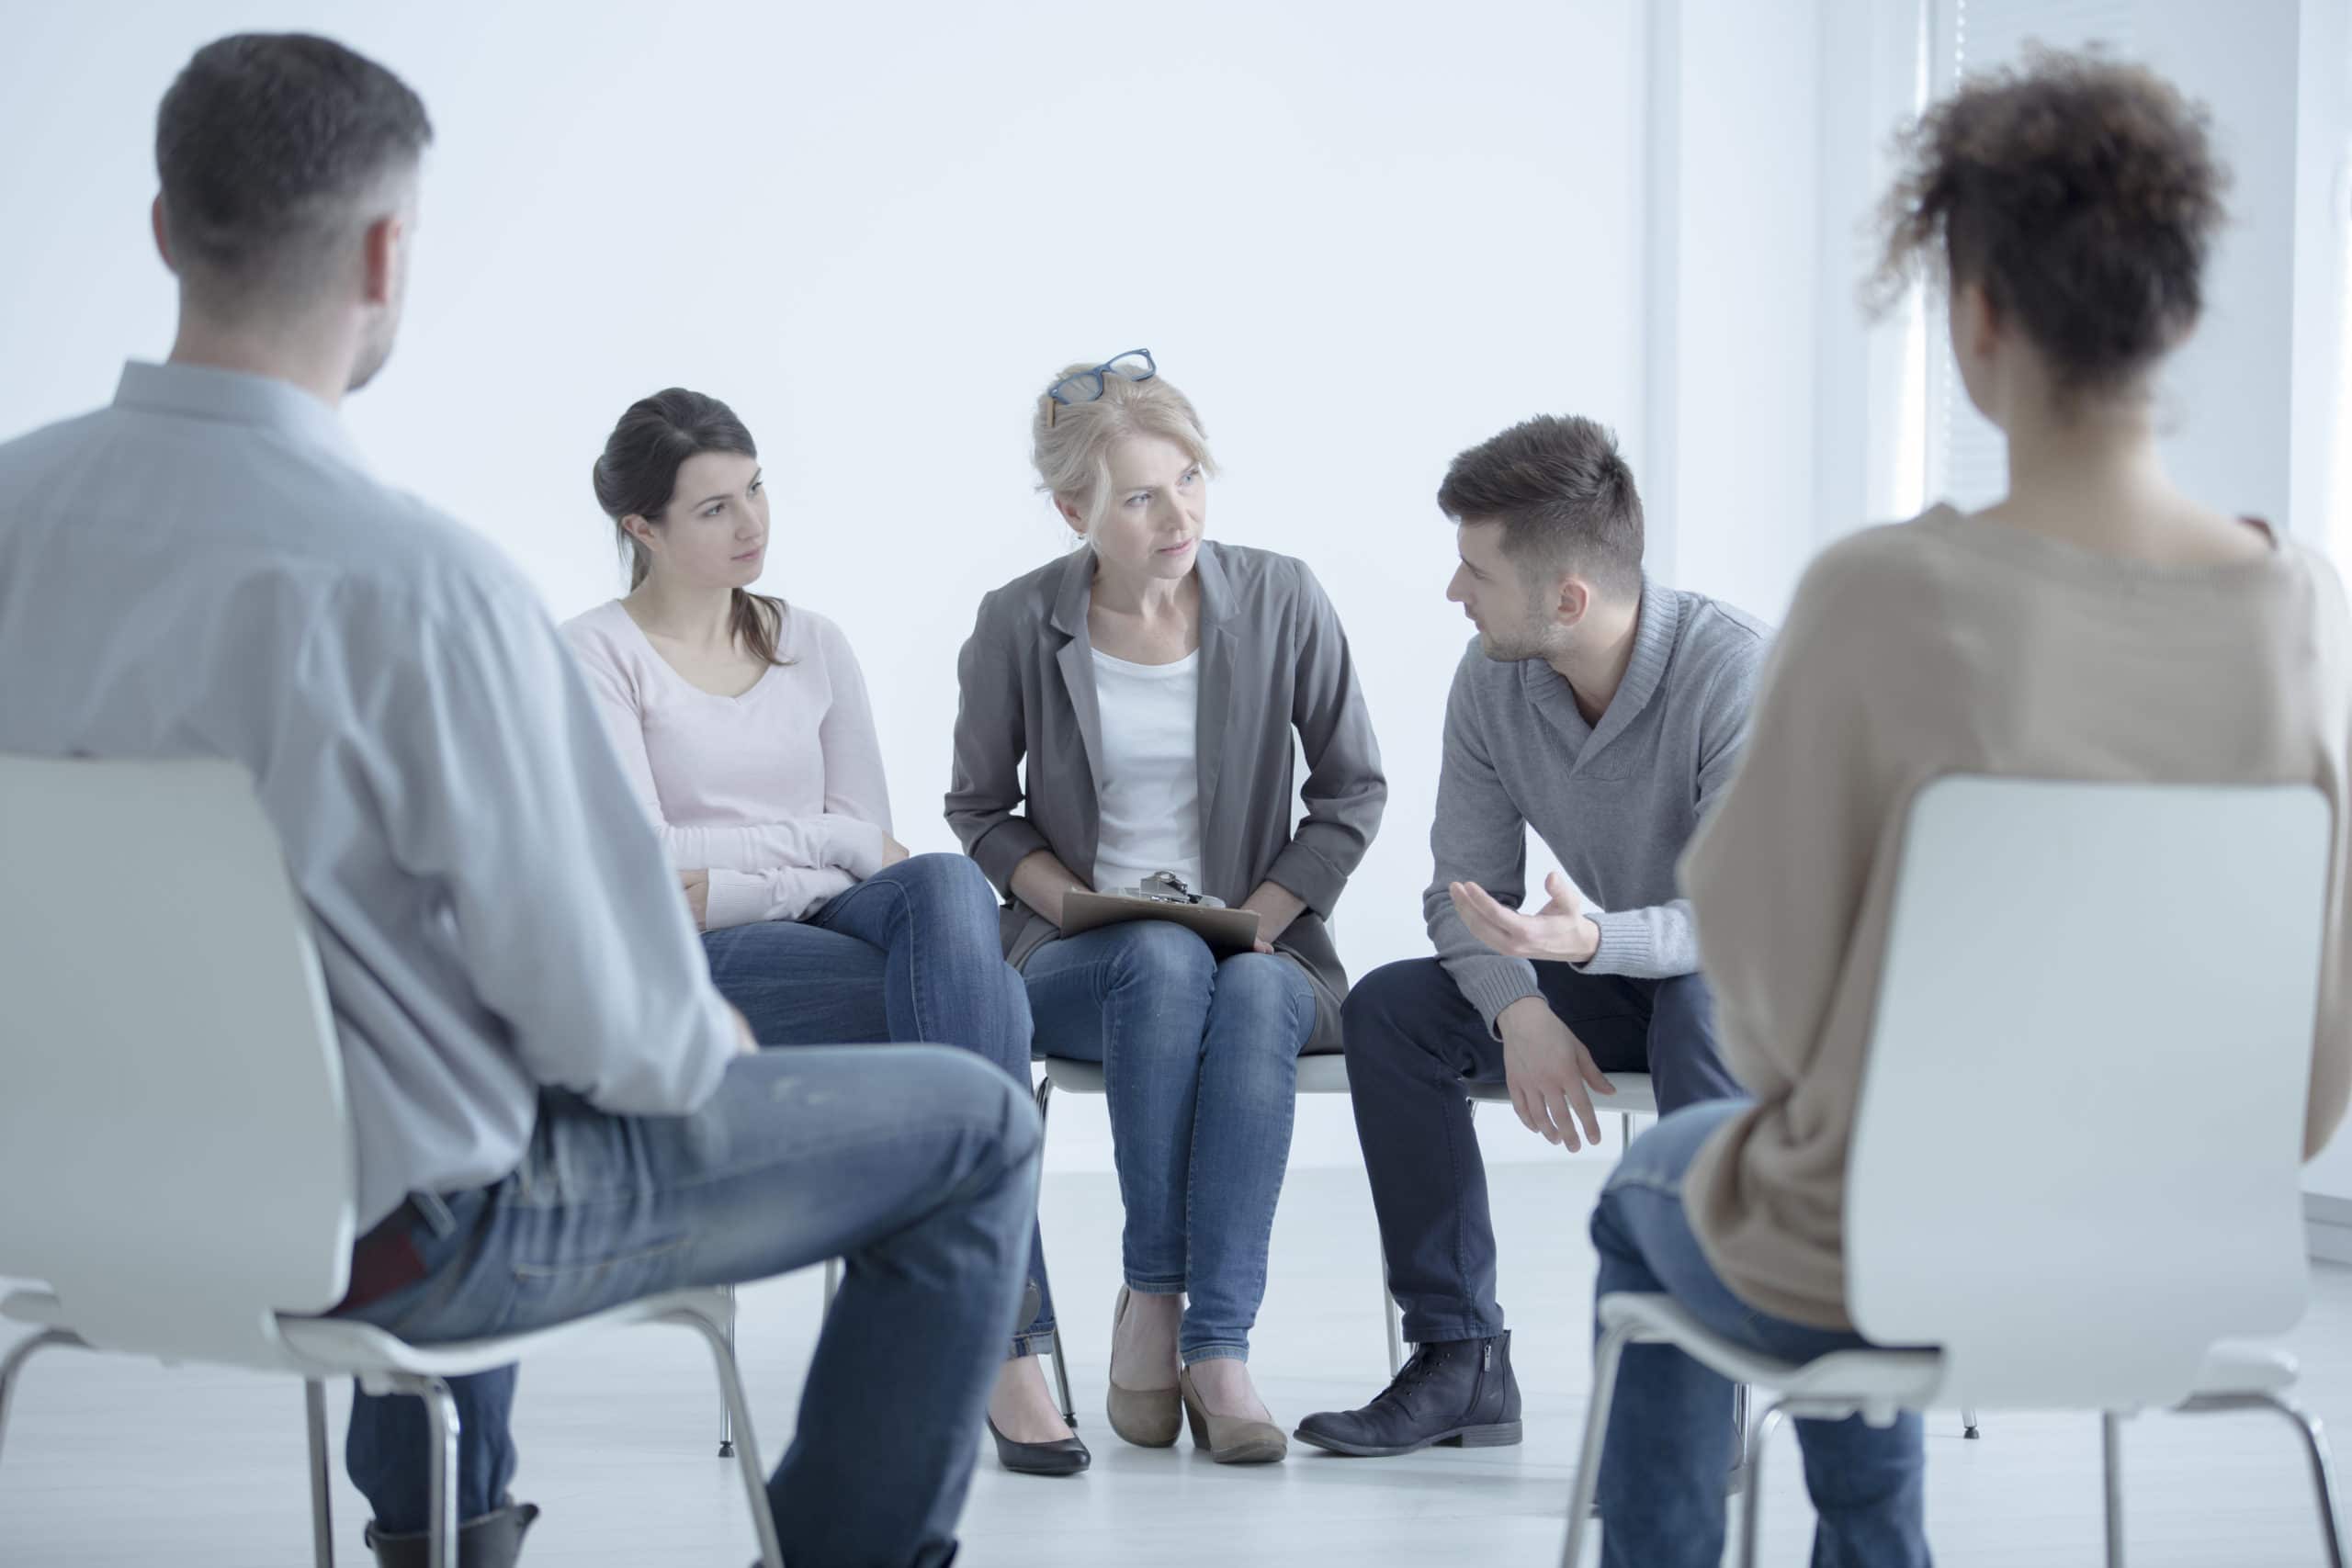 What’s It Like To Go To A Detox Support Group